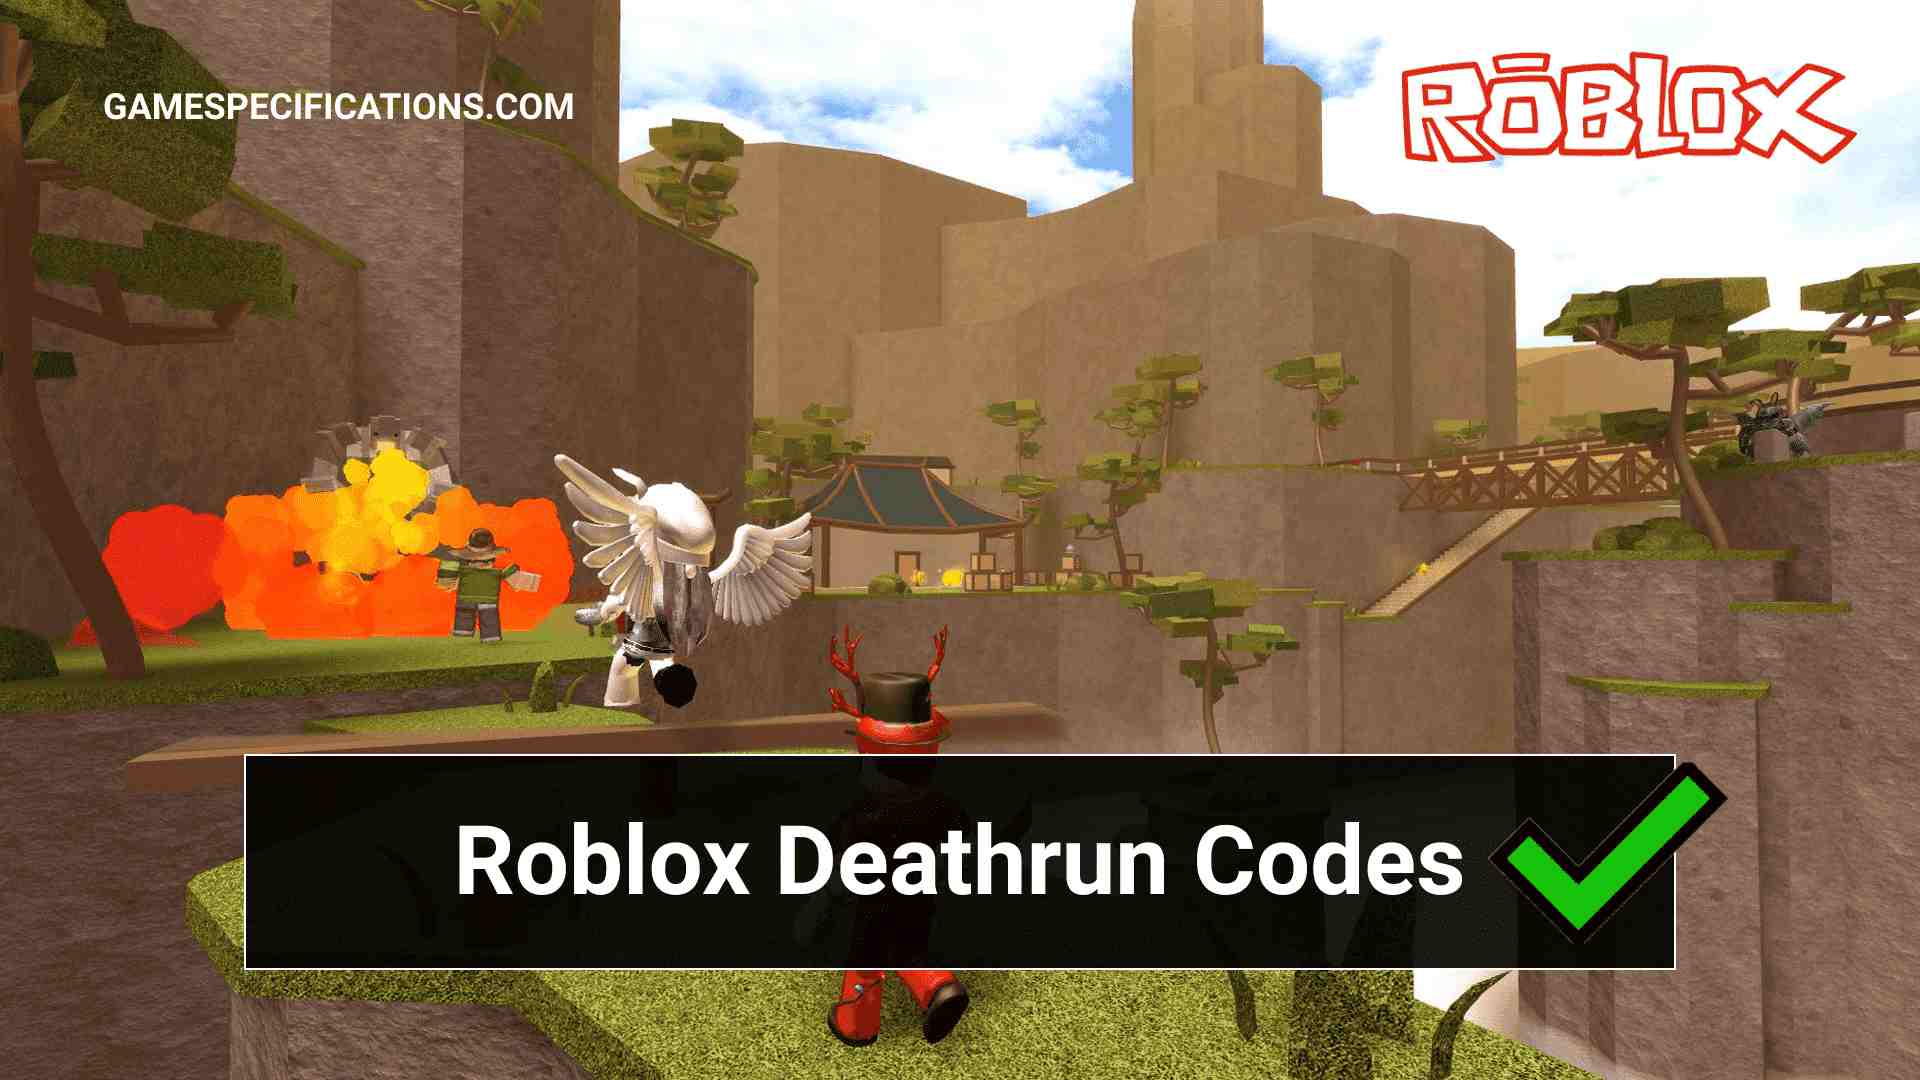 Roblox Deathrun Codes July 2021 Game Specifications - anybody else roblox id